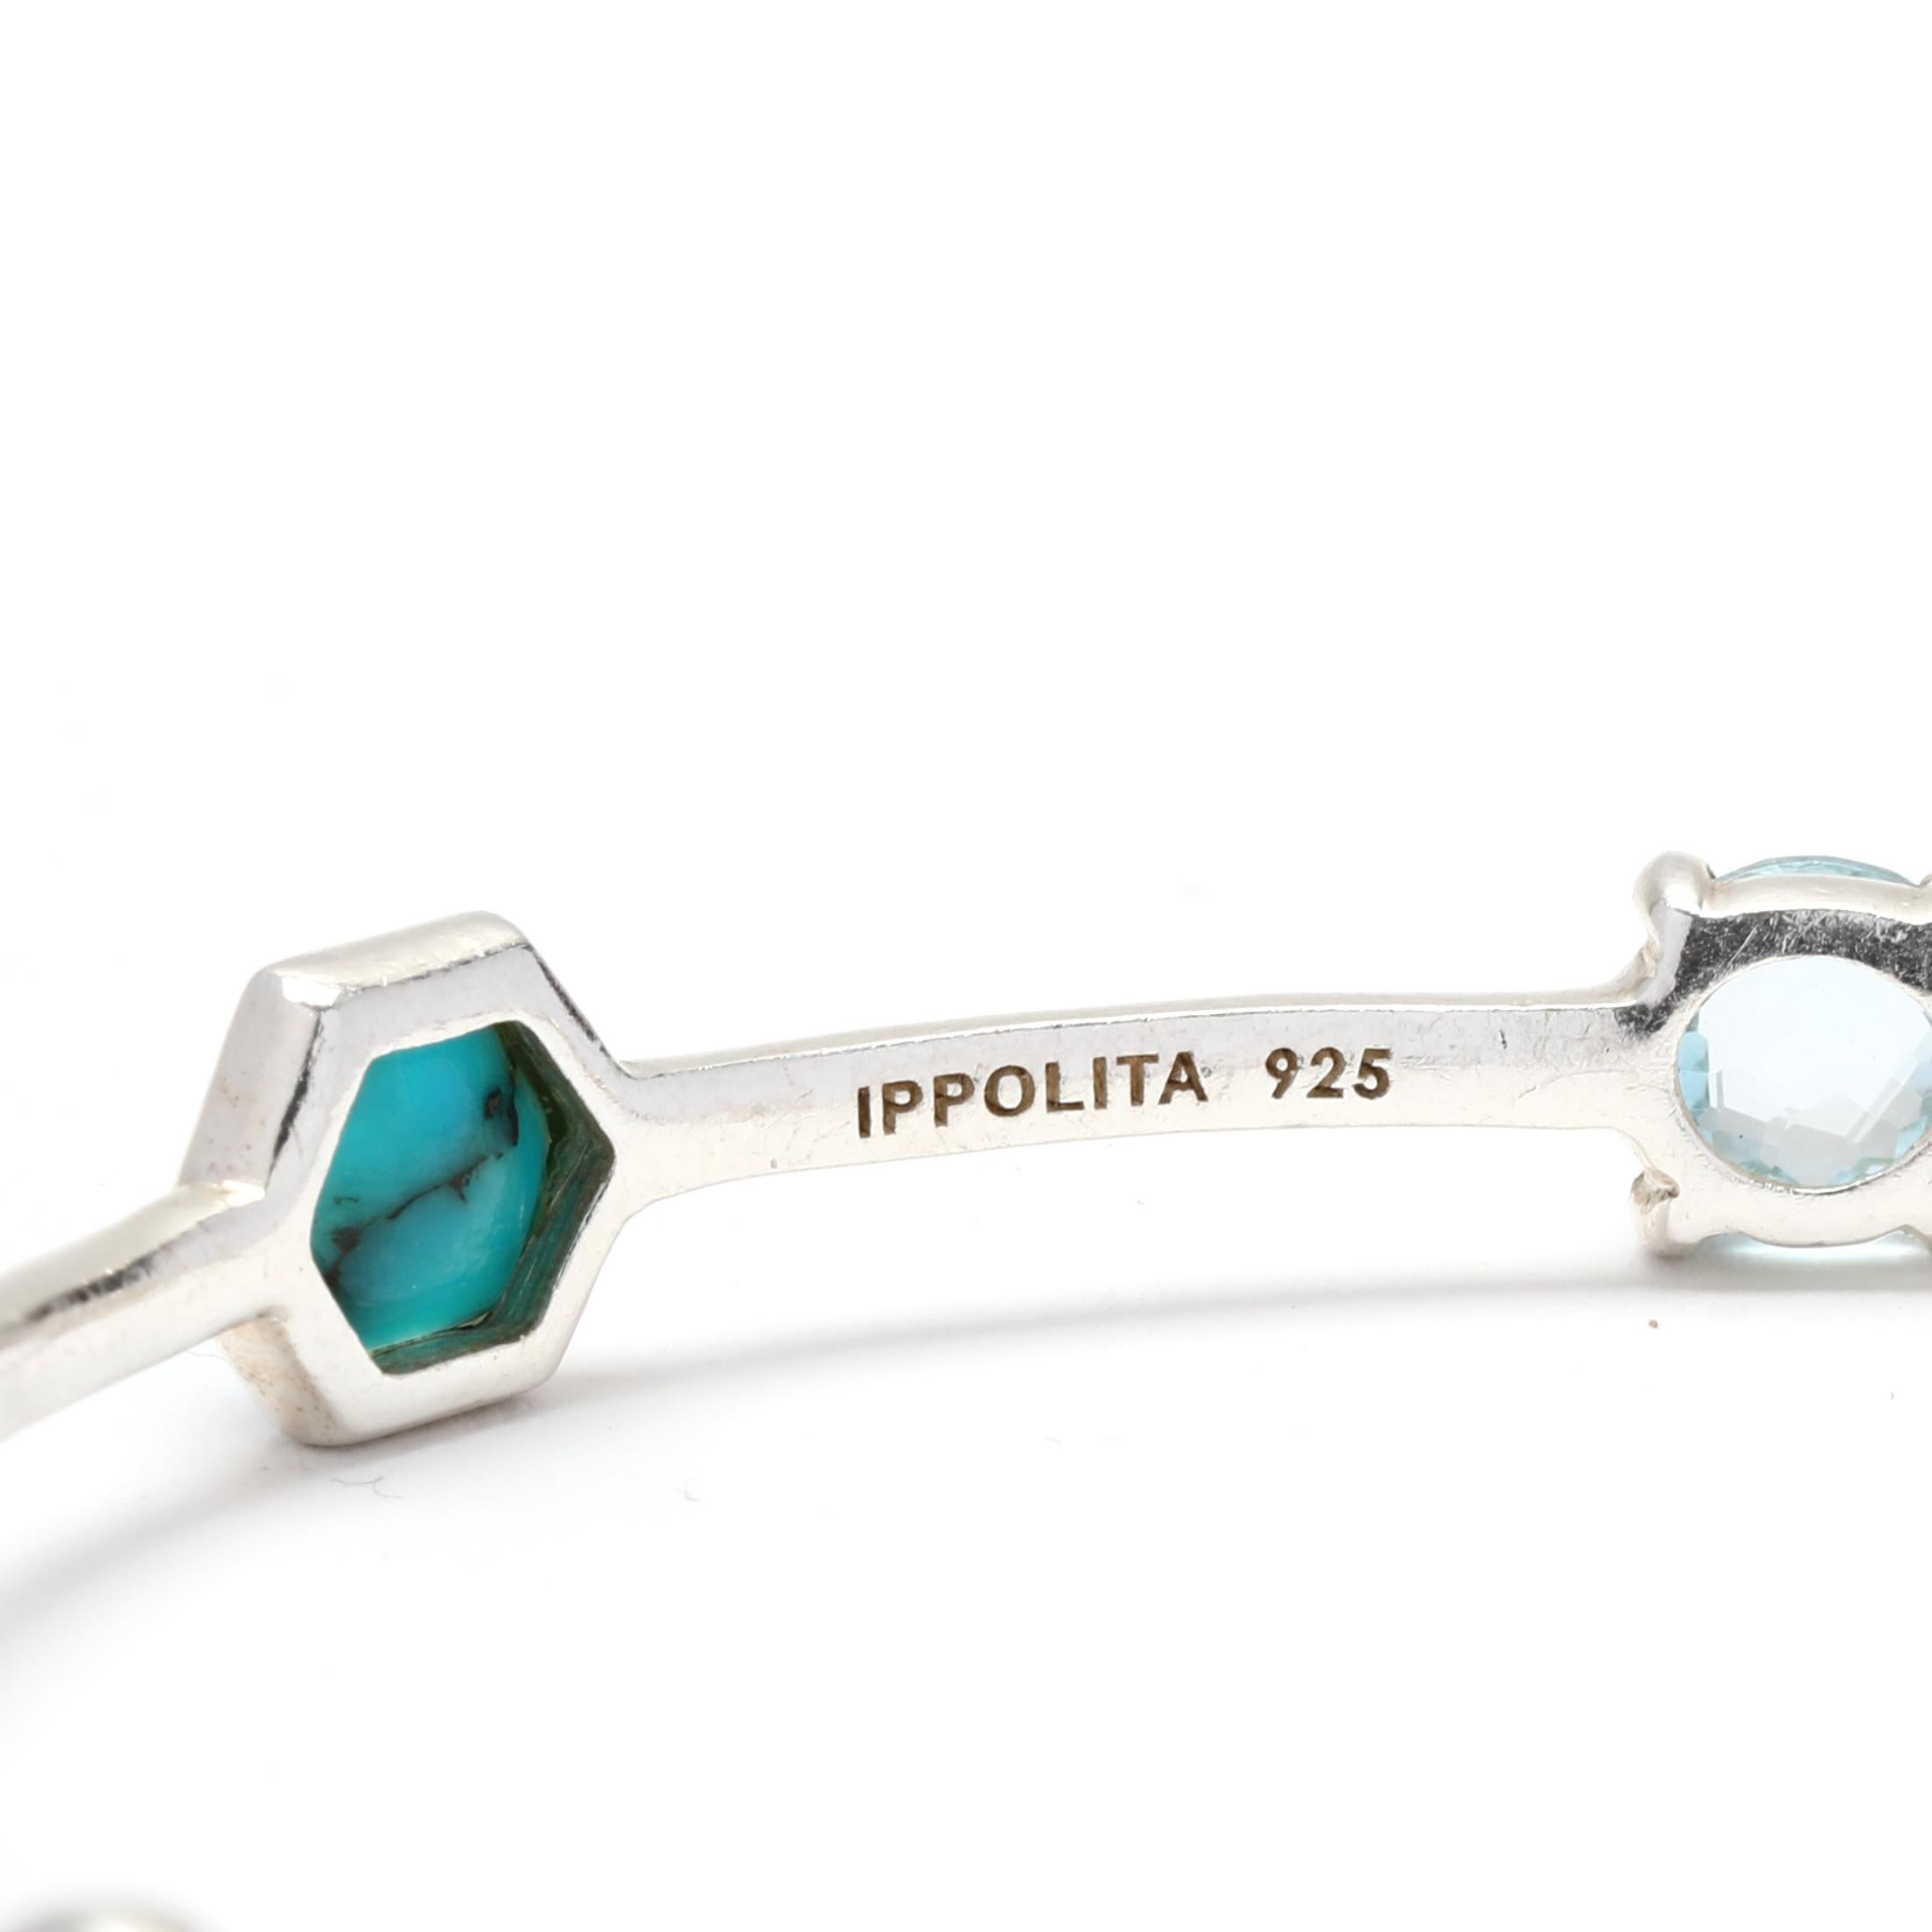 Ippolita Turquoise Blue Topaz Bangle Bracelet, Sterling Silver, Length 7 5/8 In In Good Condition For Sale In McLeansville, NC